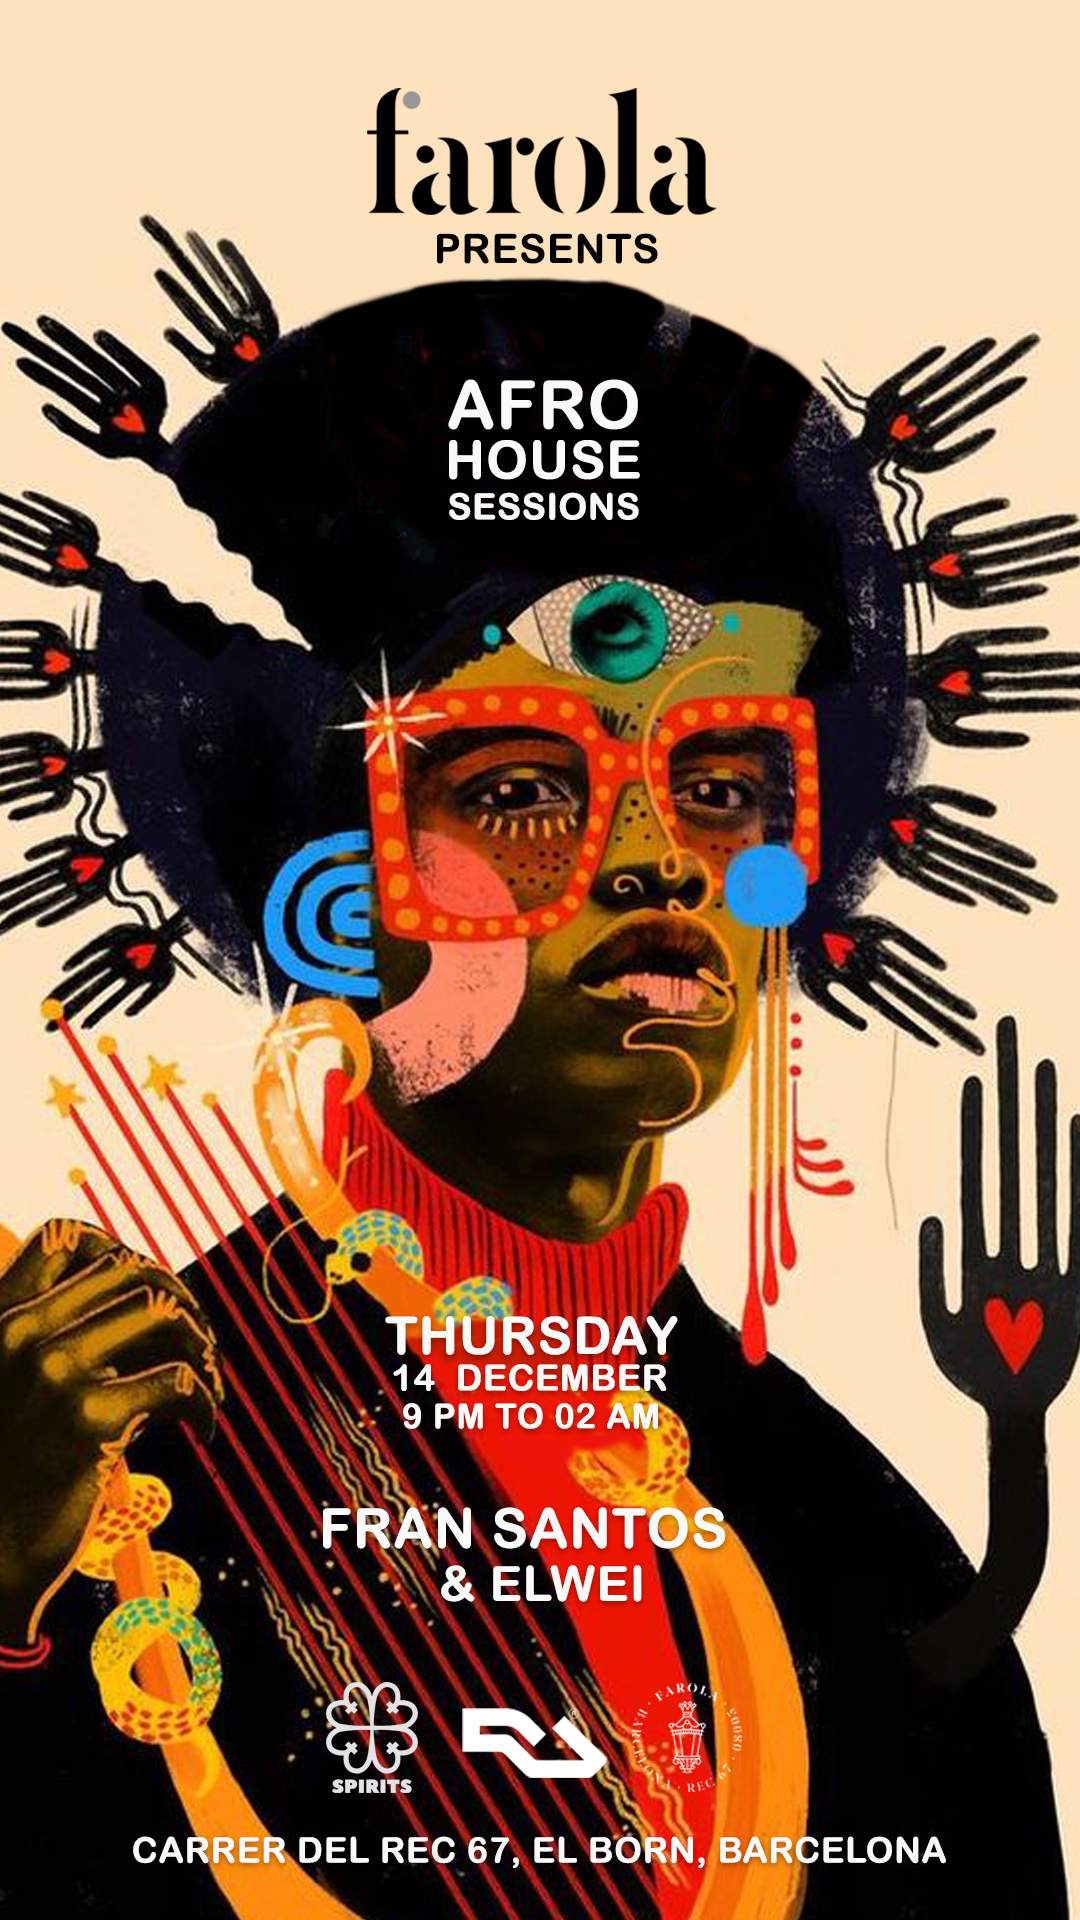 AFRO HOUSE SESSIONS [FREE TICKETS] - フライヤー表